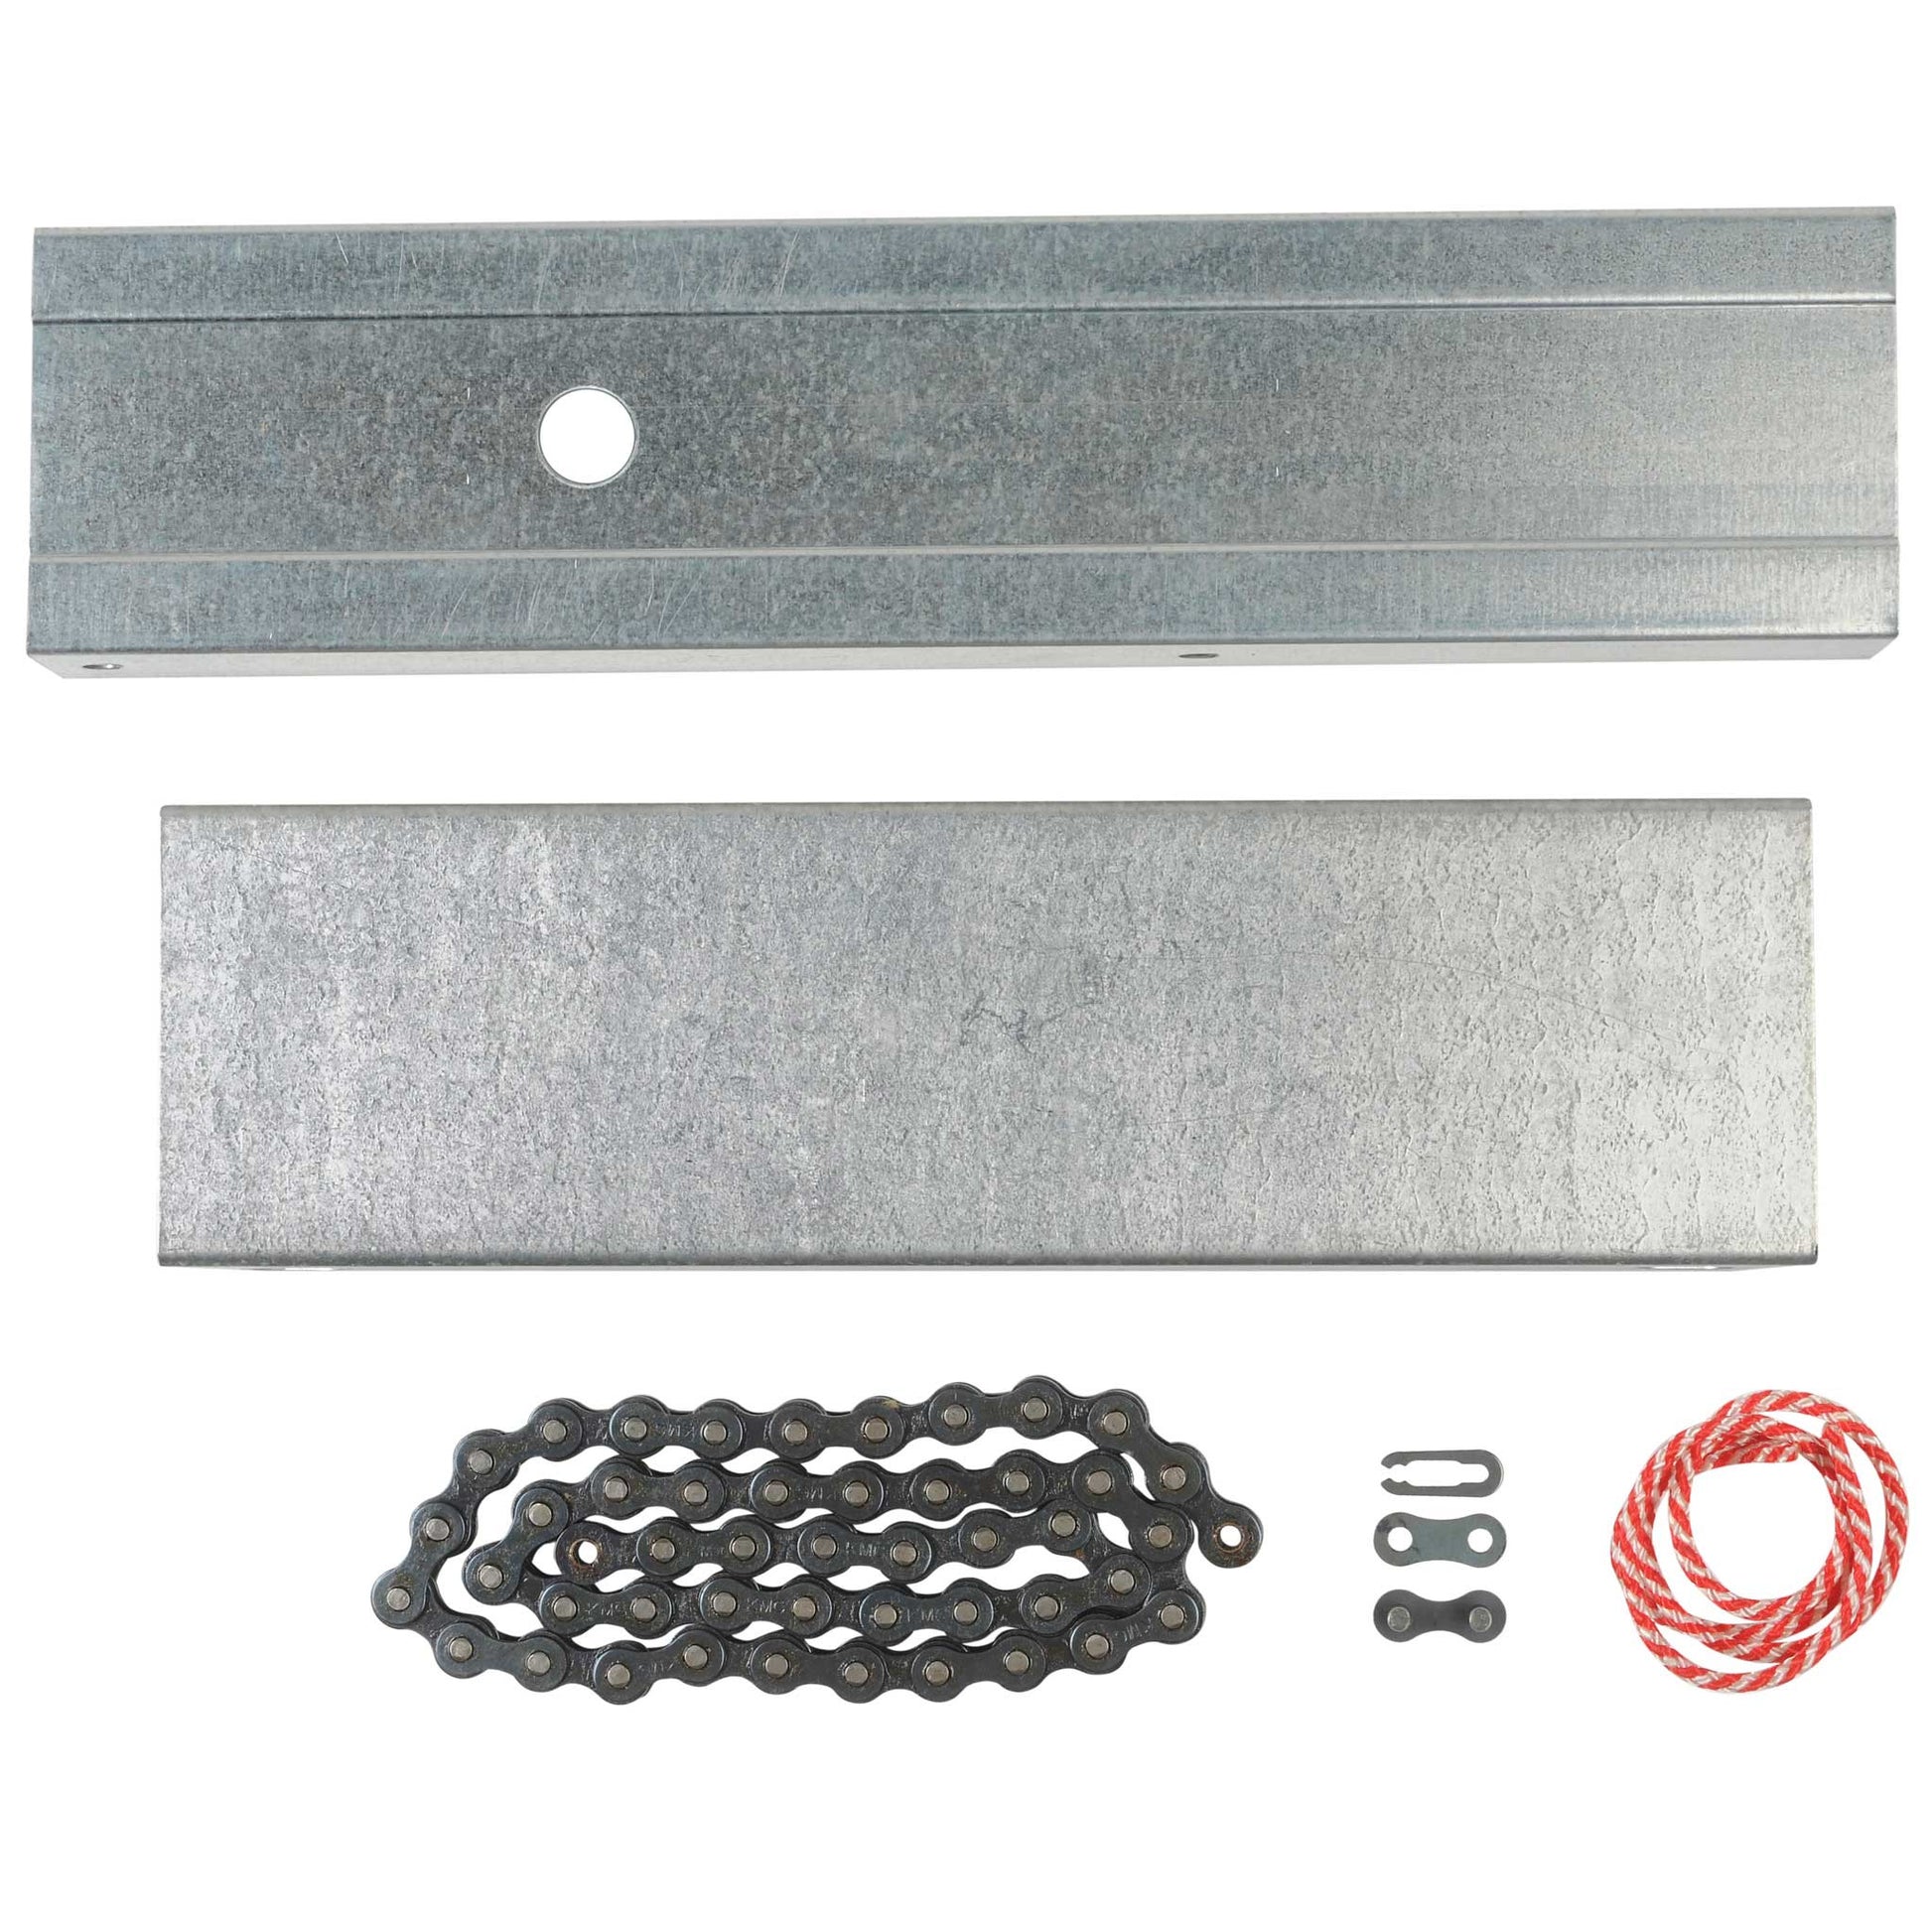 Extension Kit (to 8') for 3 Piece, Chain Drive C-Channel Rails ,  Extender Kits - The Genie Company